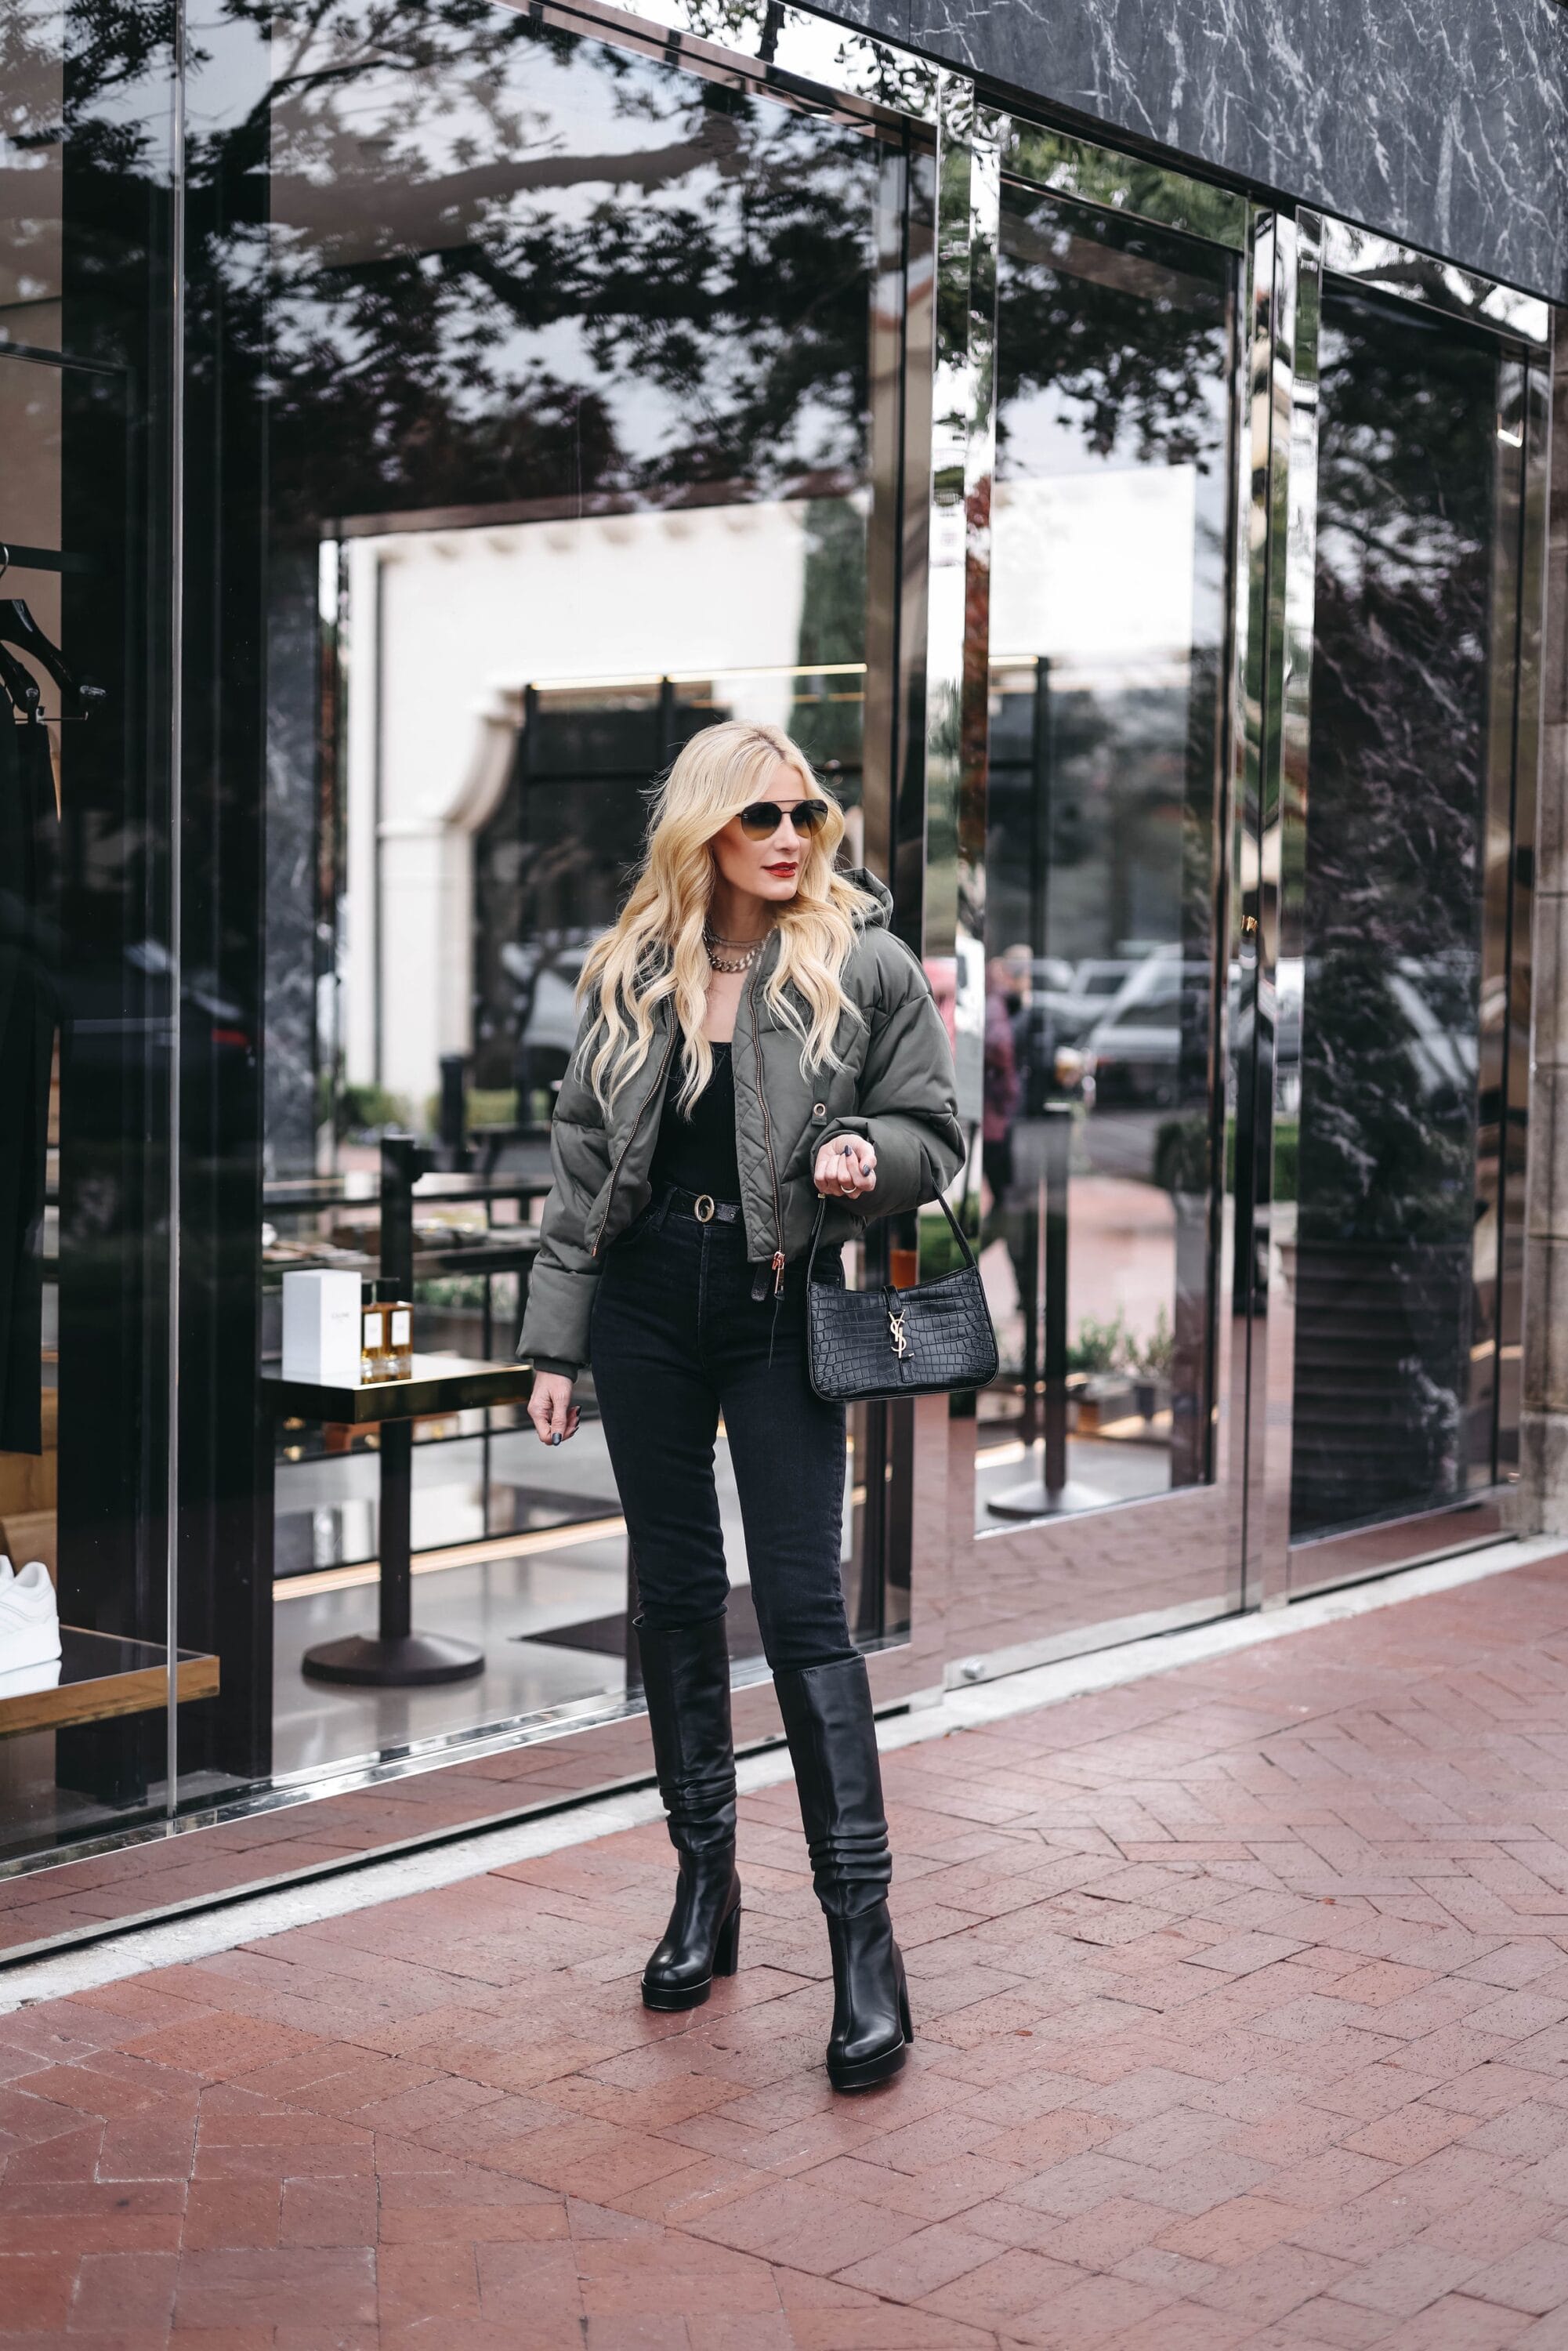 Over 40 Dallas fashion blogger wearing green ouffer jacket with black jeans nad black bodysuit.